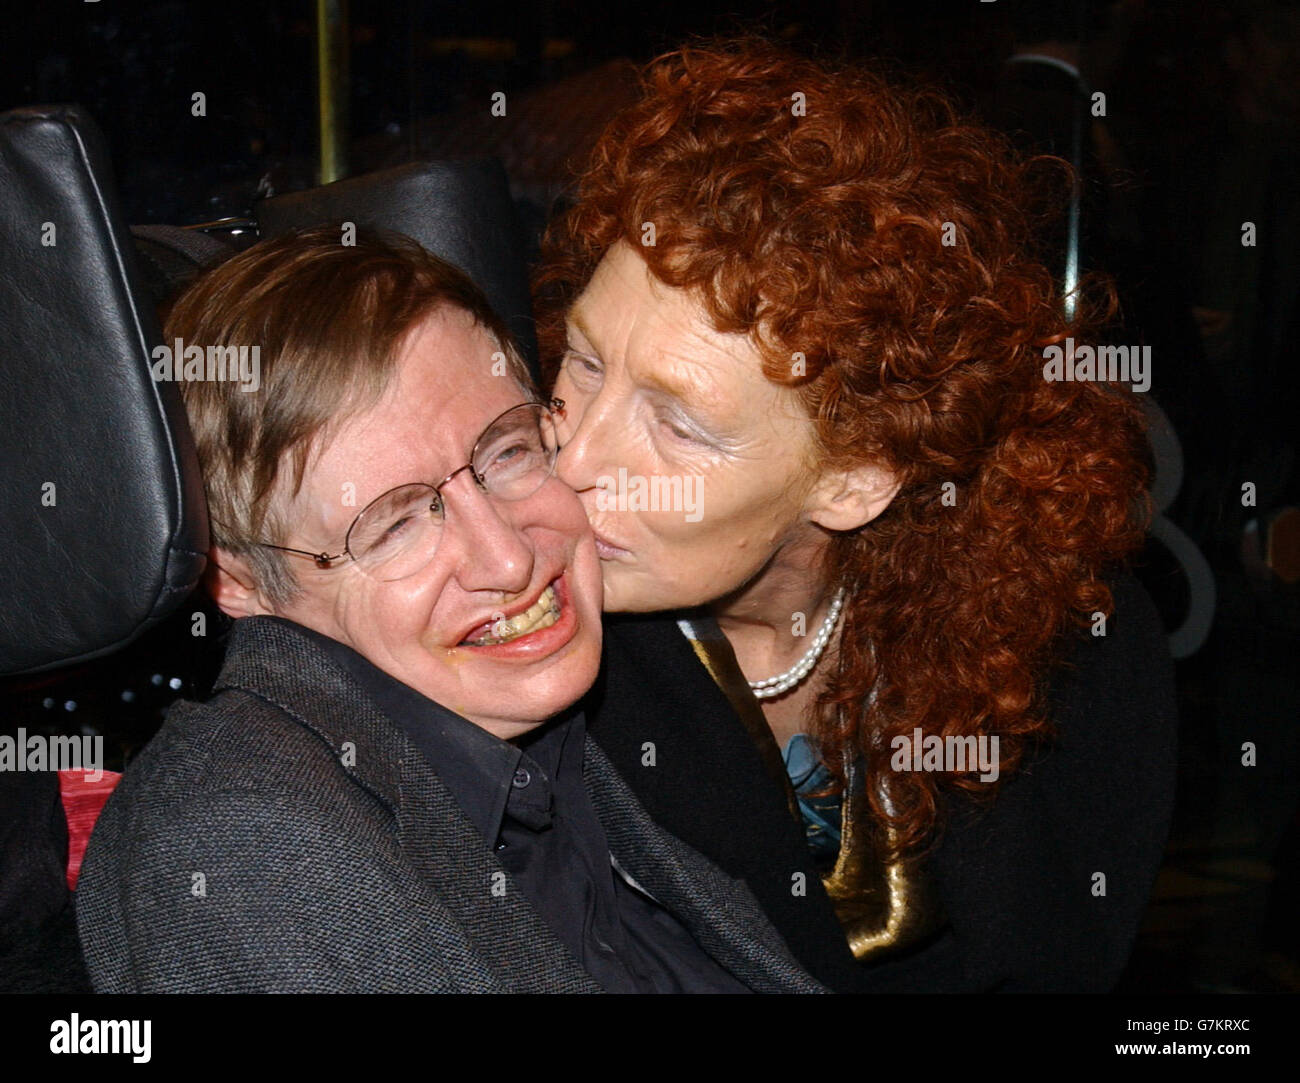 Lemony Snicket's: A Series of Unfortunate Events UK premiere - UCI Empire, Leicester Square. Stephen Hawking and his wife Elaine Mason. Stock Photo